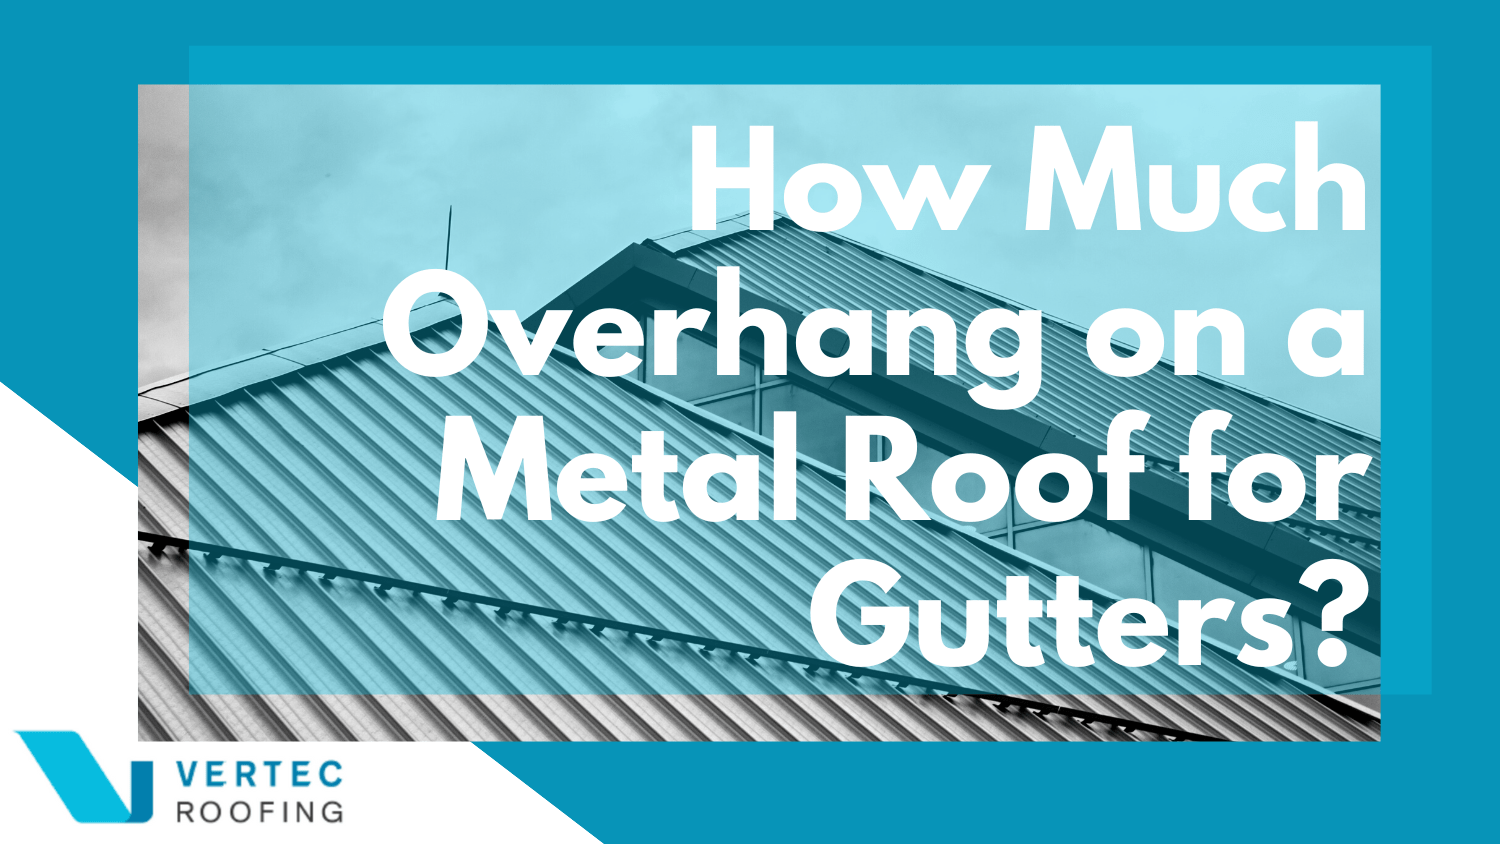 How much overhang on metal roof for gutters?